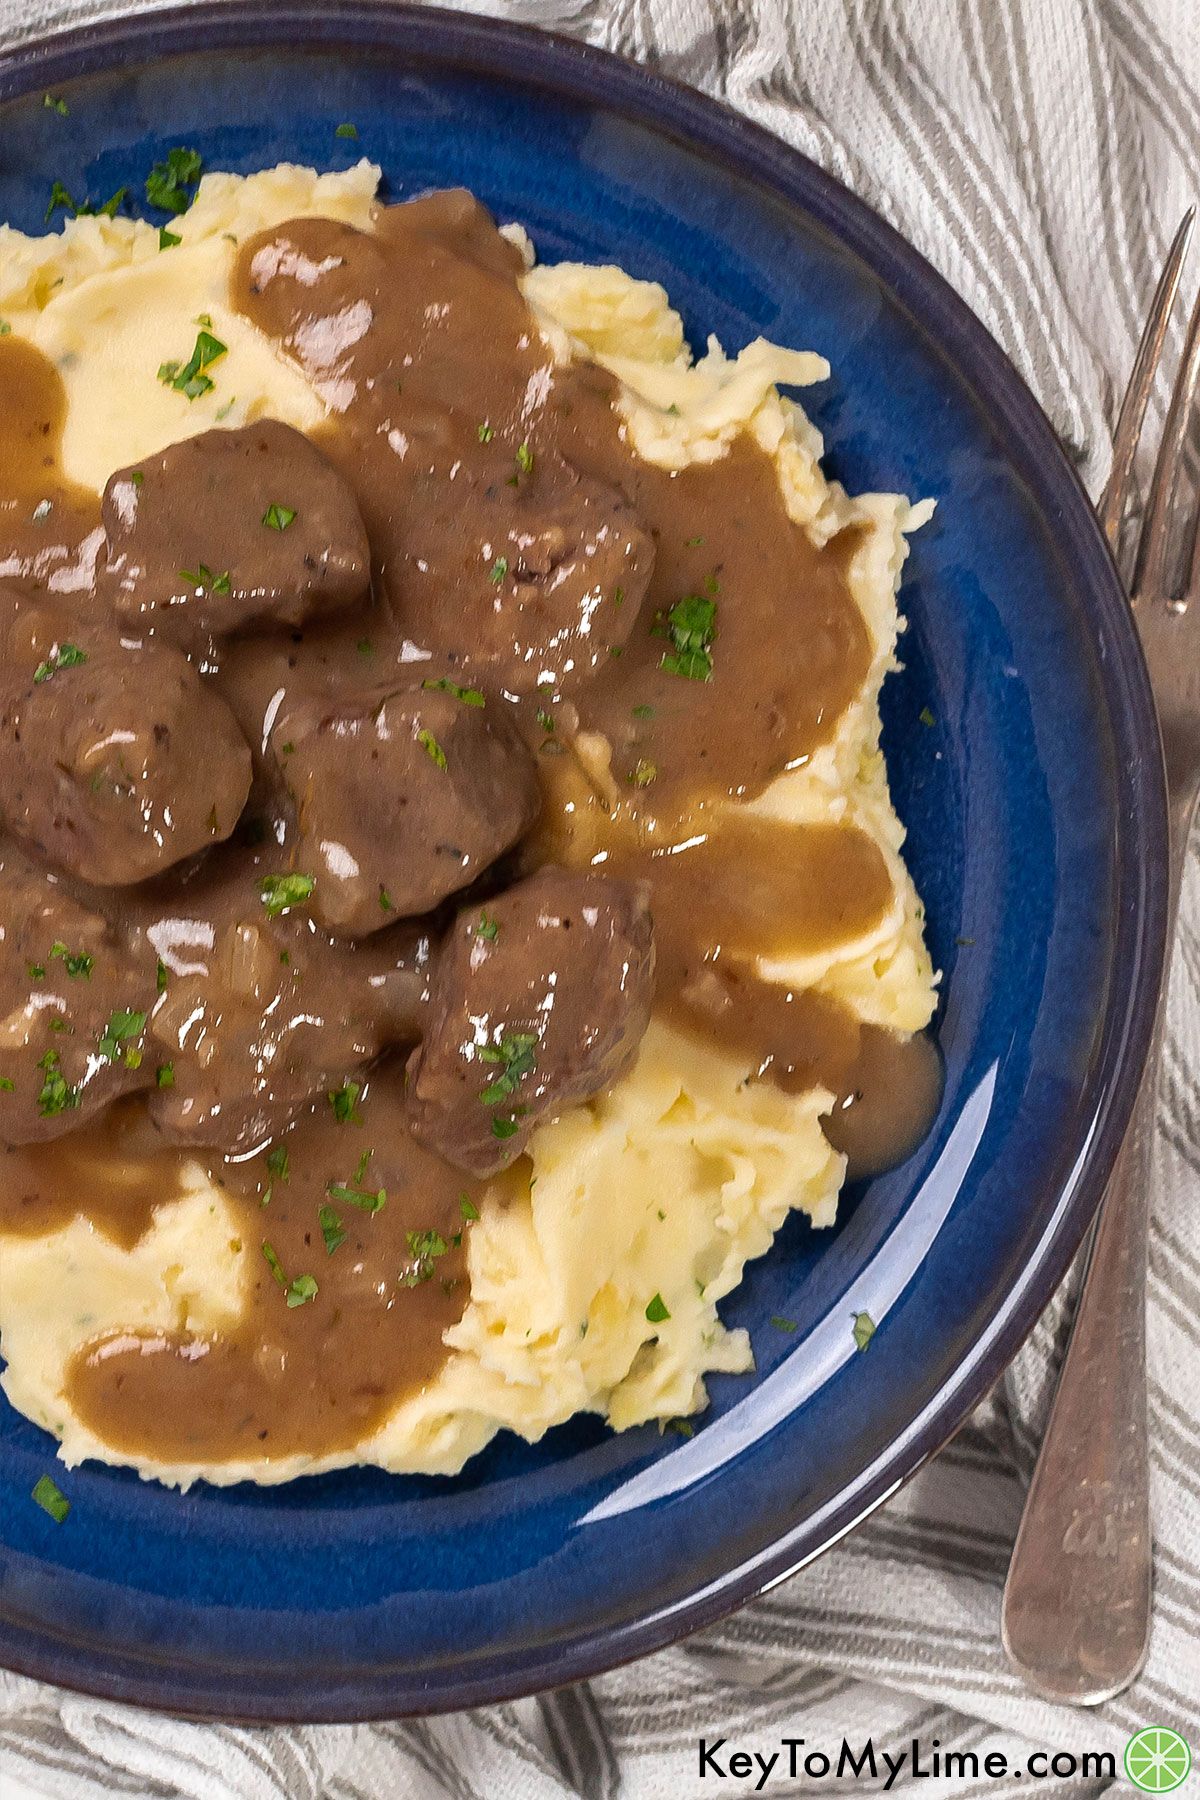 A close up image showing the texture of beef tips and gravy on a plate of mashed potatoes.